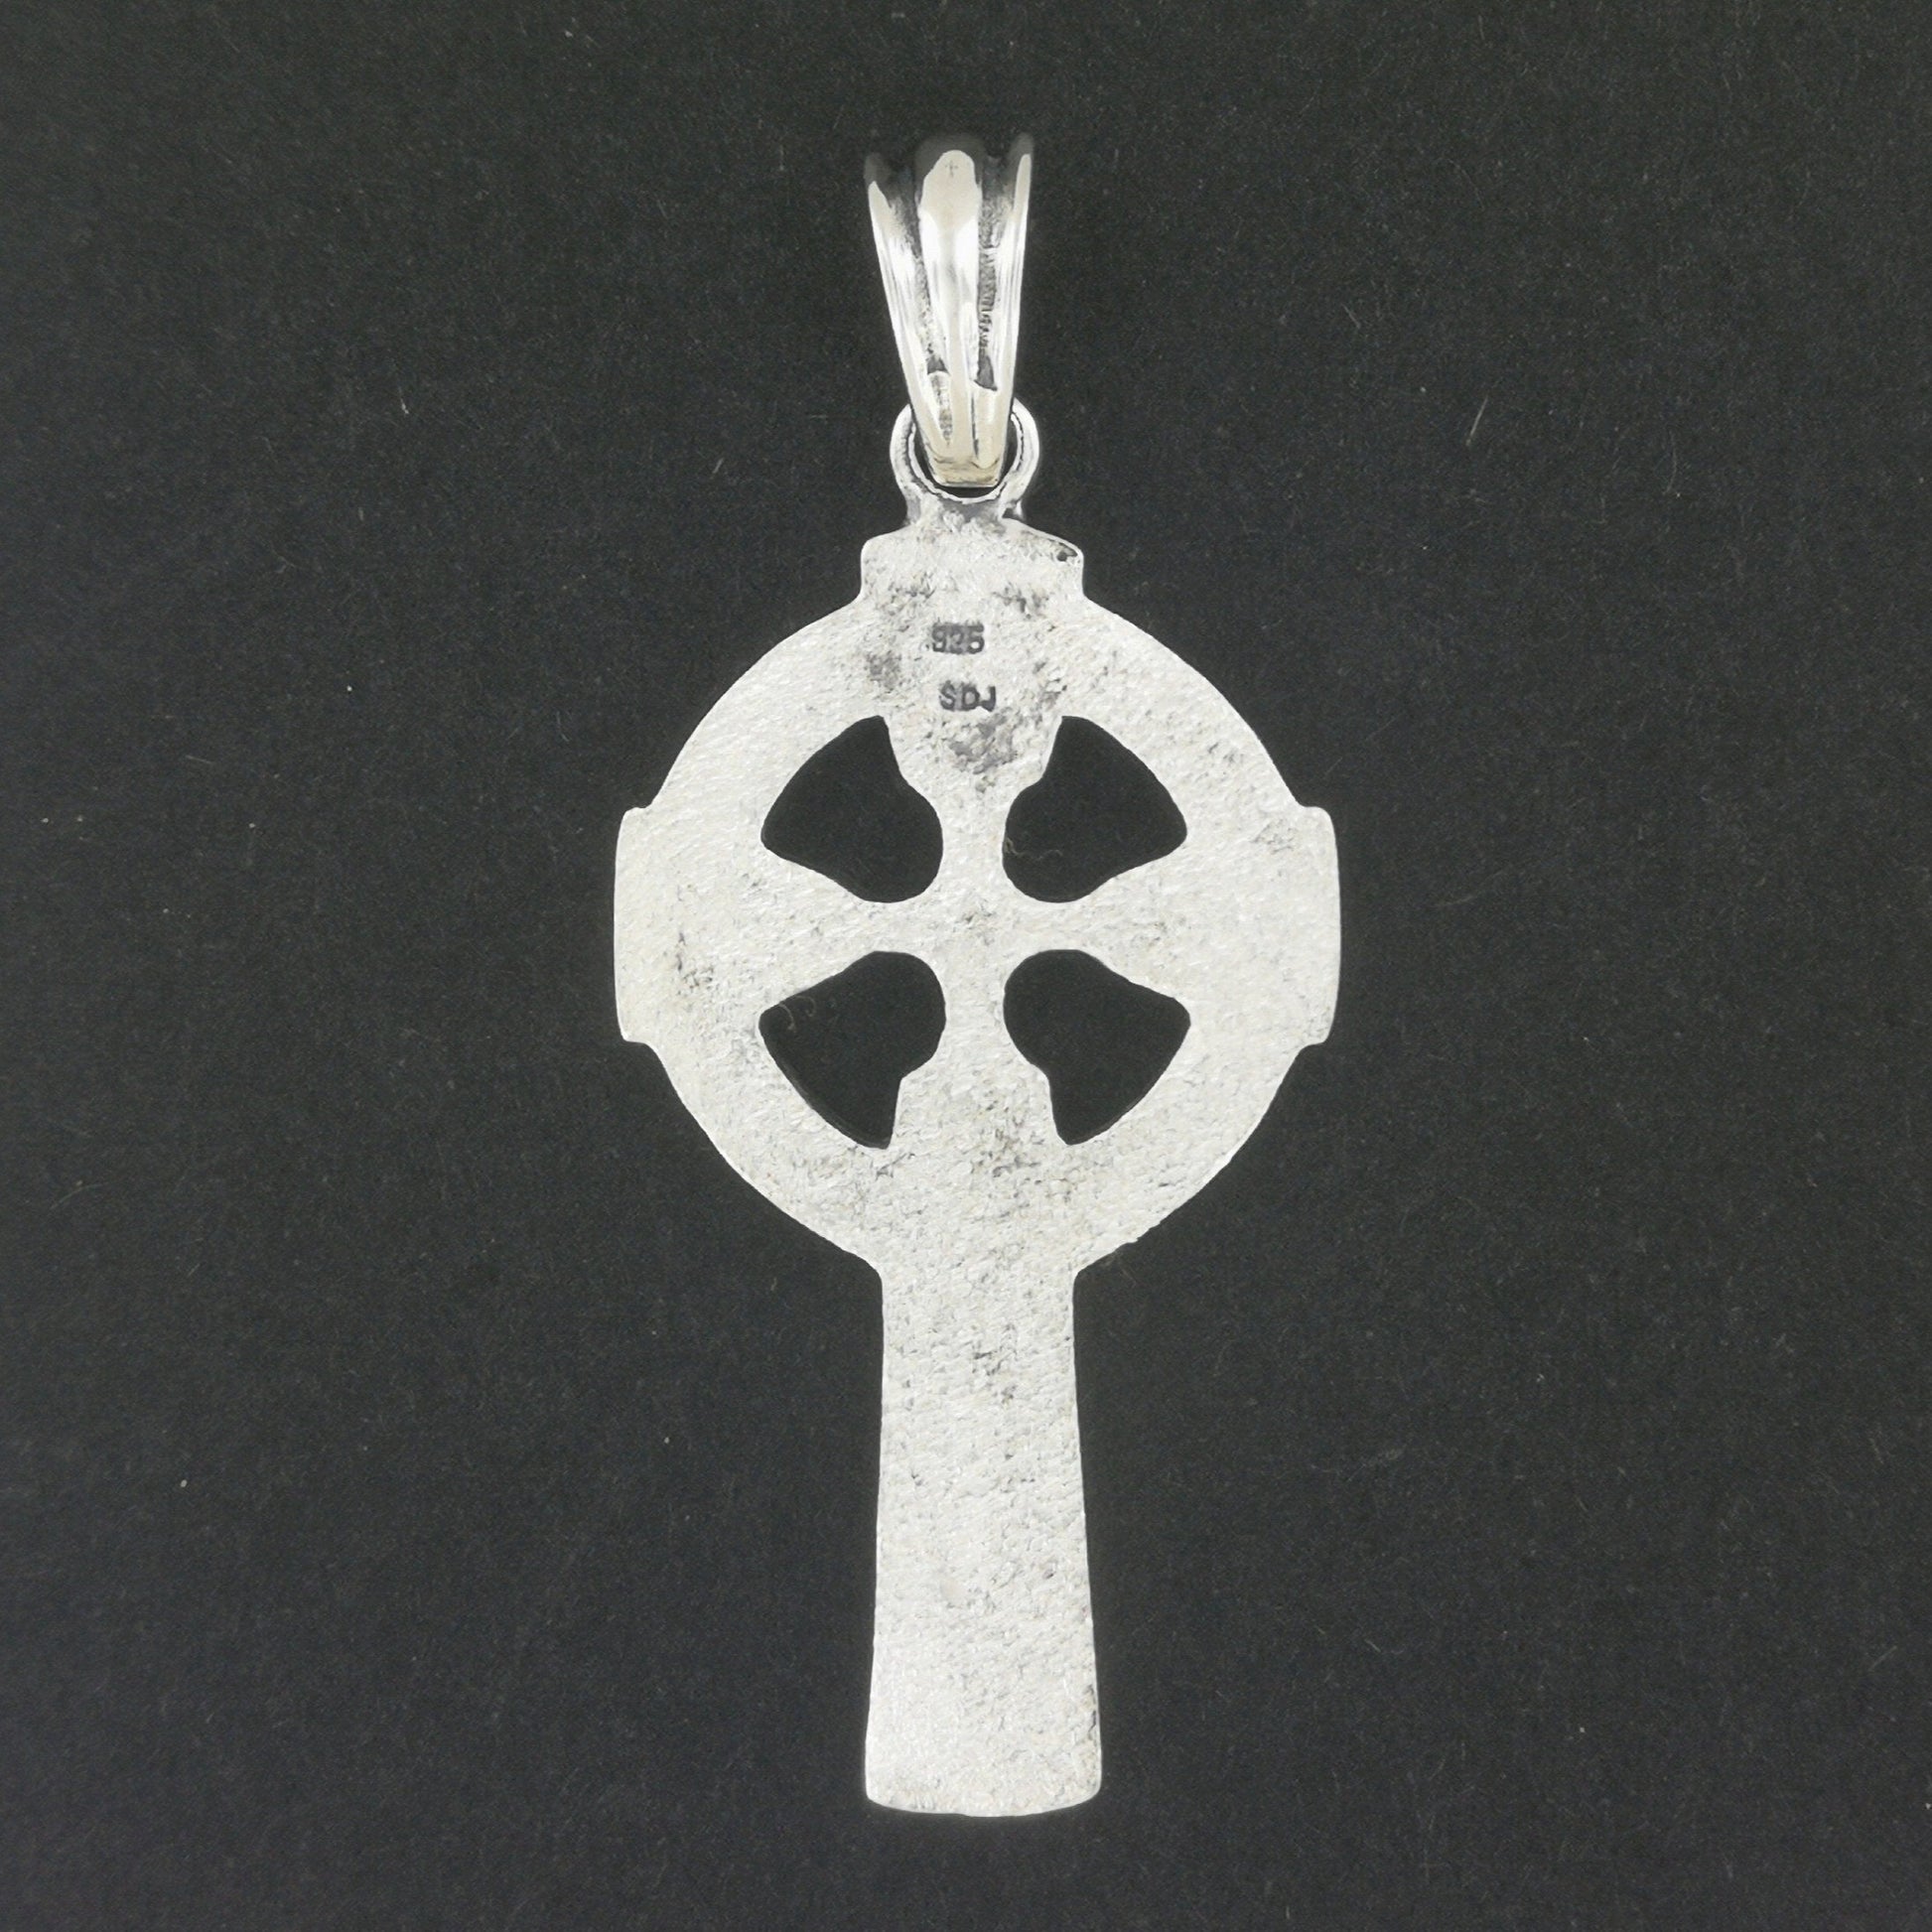 Large Celtic Cross in Sterling Silver or Antique Bronze, Irish Celtic Jewelry, Irish Celtic Jewellery, Silver Celtic Pendant, Bronze Celtic Pendant, Celtic Cross Jewelry, Celtic Cross Jewellery, Sterling Silver Celtic Cross Pendant, Antique Bronze Celtic Cross Pendant, Silver Celtic Jewelry, Silver Celtic Jewellery, Bronze Celtic Jewelry, Bronze Celtic Jewellery, Irish Cross Pendant, Silver Irish Jewelry, Silver Irish Jewellery, Bronze Irish Jewelry, Bronze Irish Jewellery